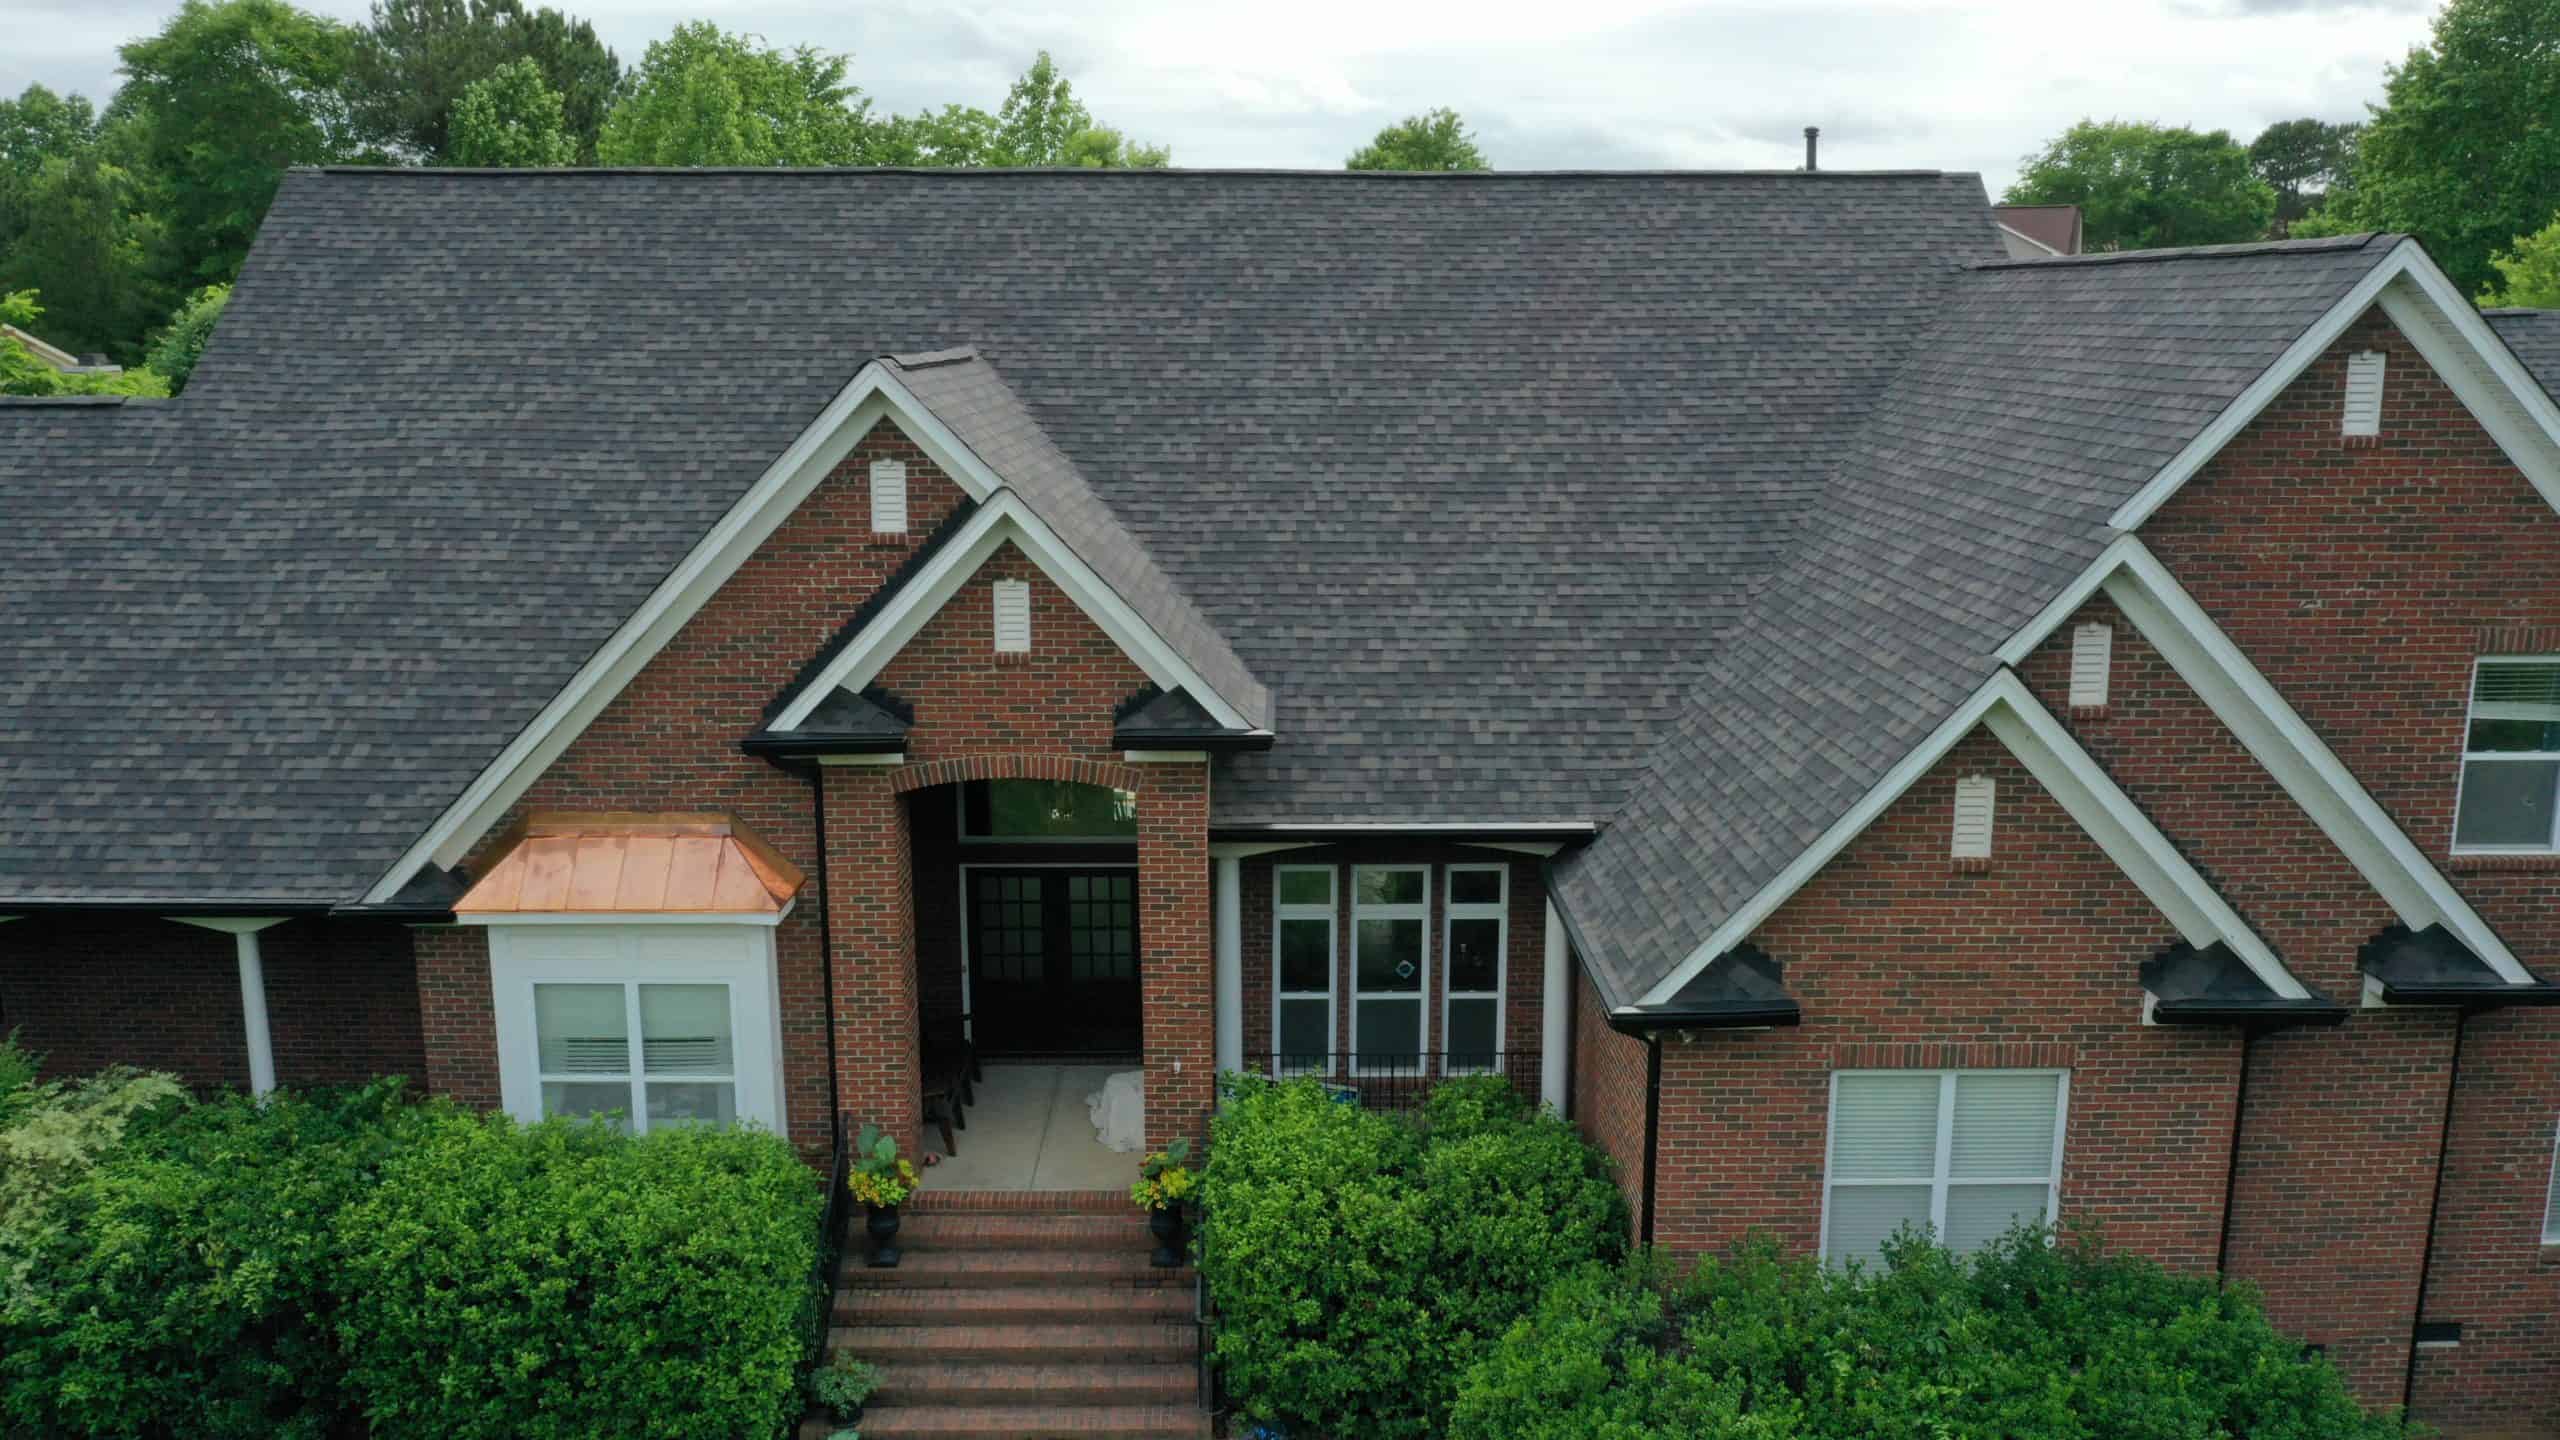 http://front%20view%20of%20brick%20home%20with%20black%20sable%20duration%20shingles%20and%20green%20bushes